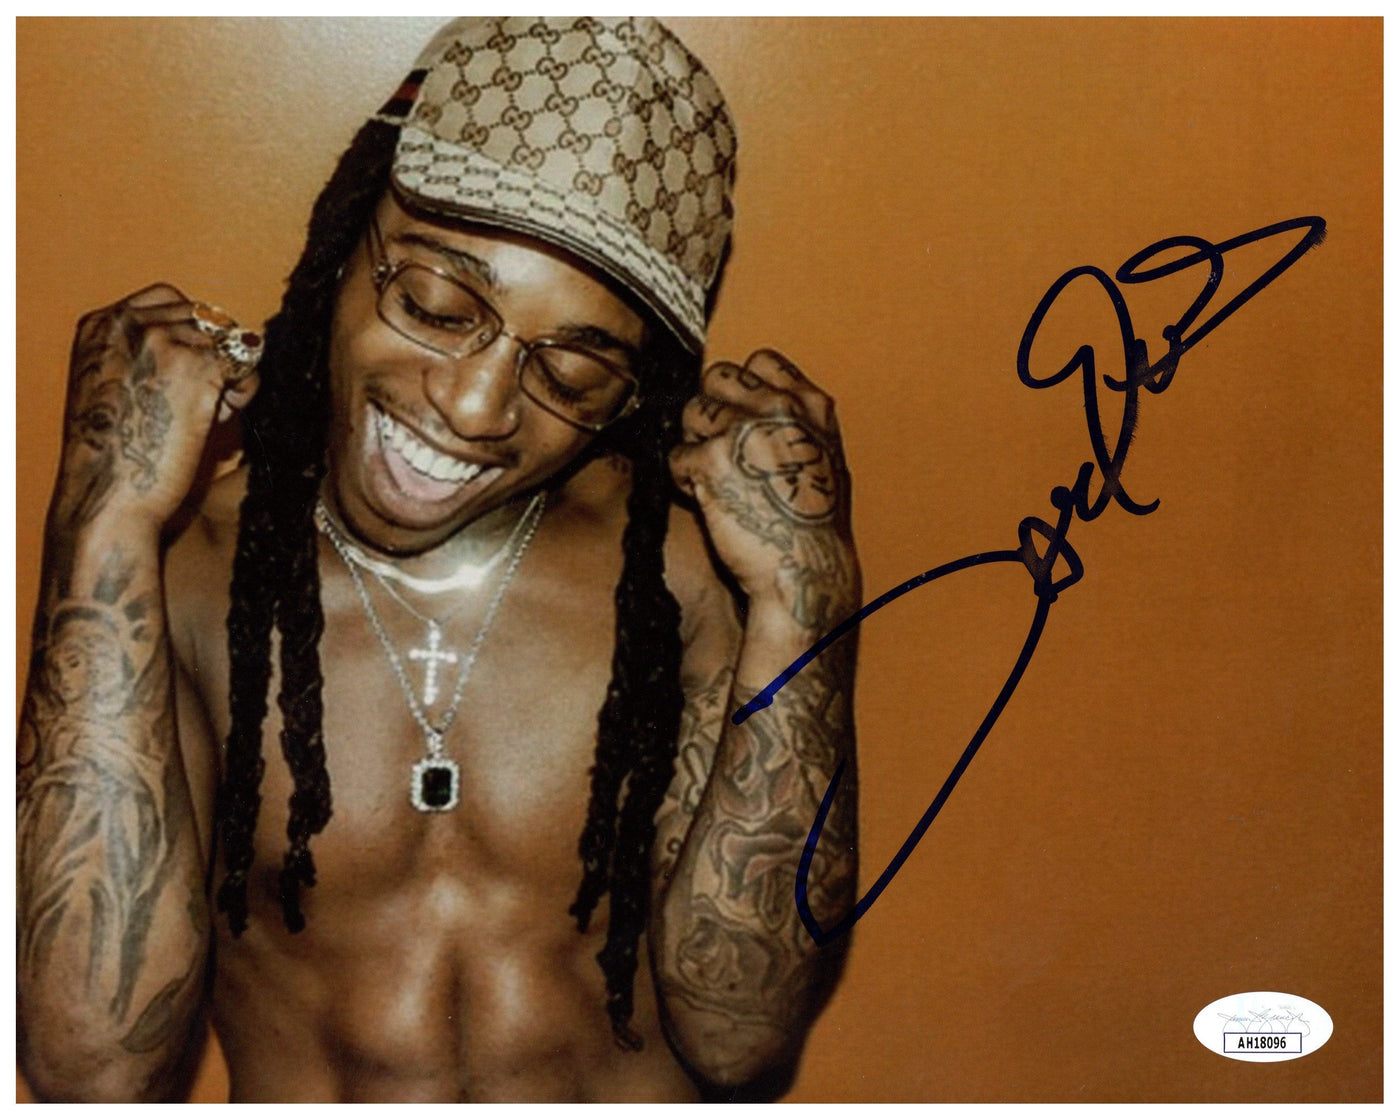 Jacquees Signed 8x10 Photo King of R&B Autographed JSA COA